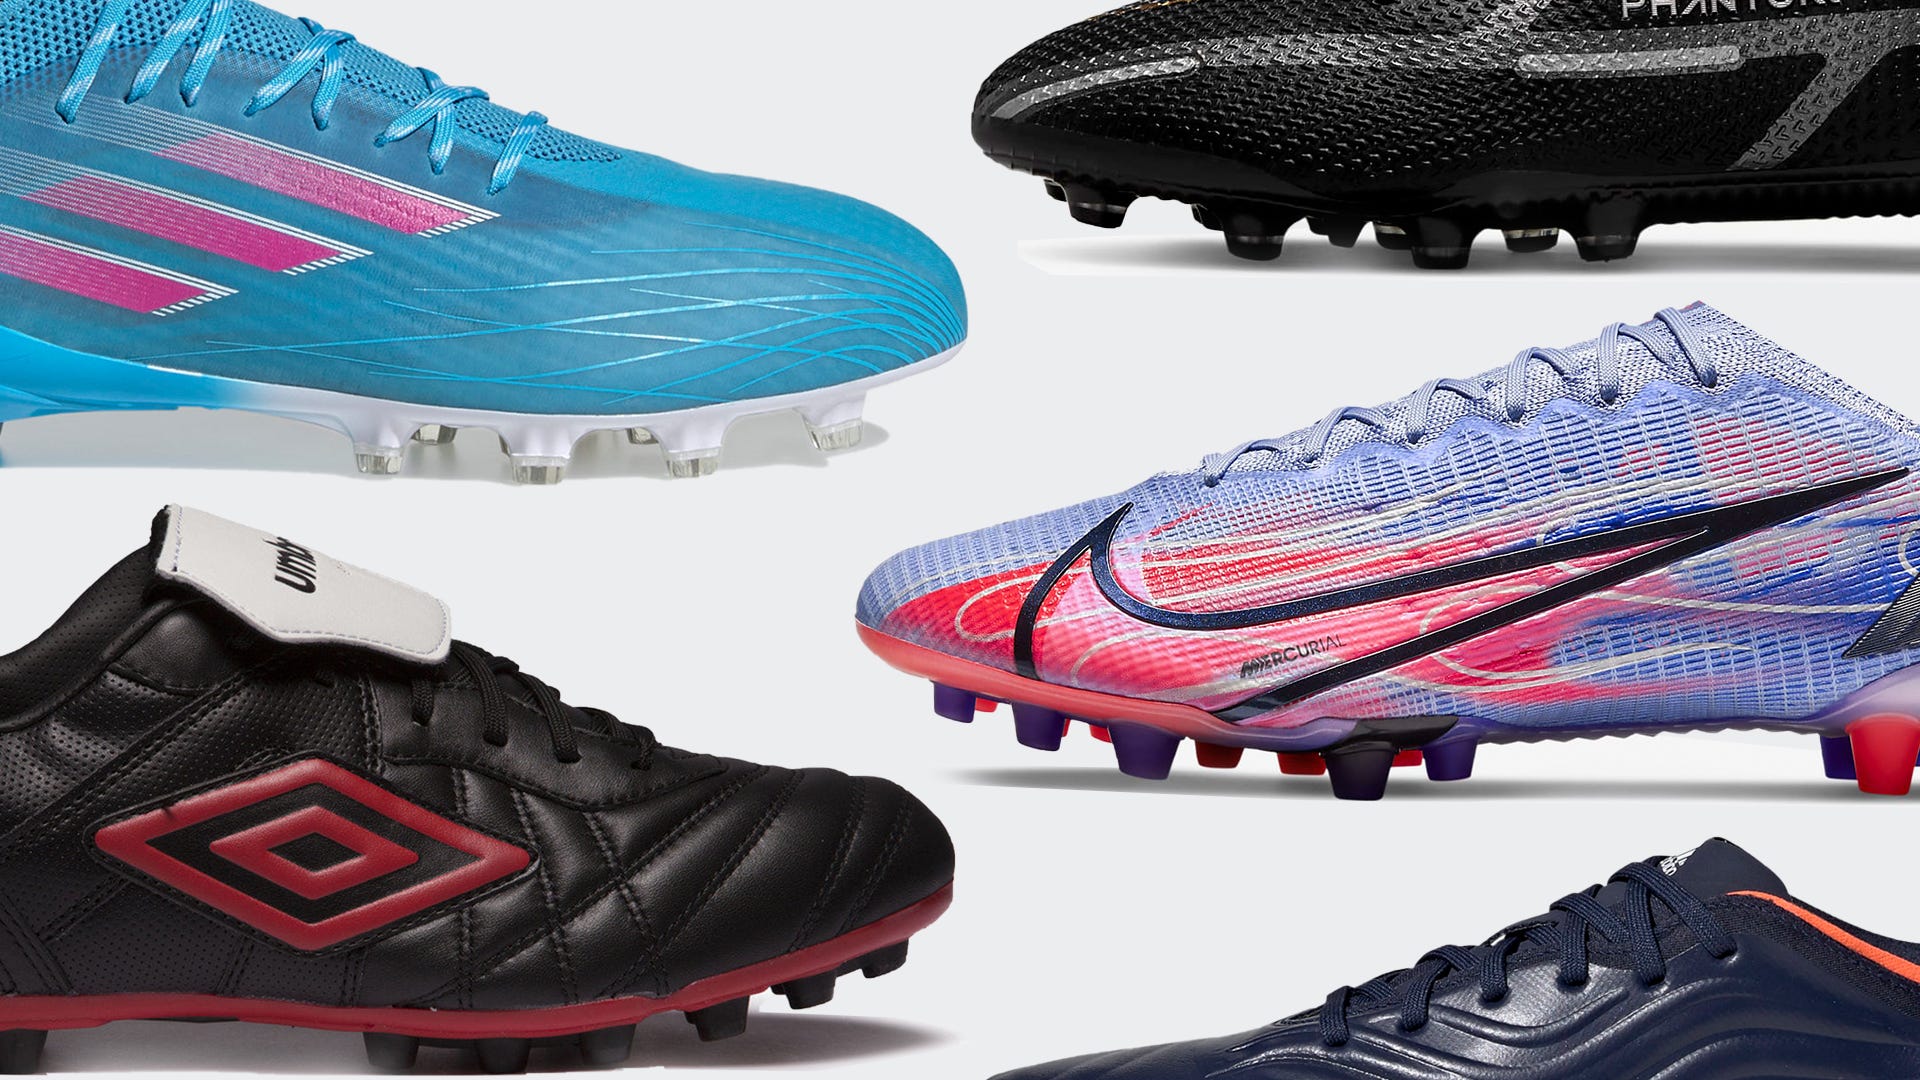 Nike, adidas, New Balance - who makes the best soccer cleats